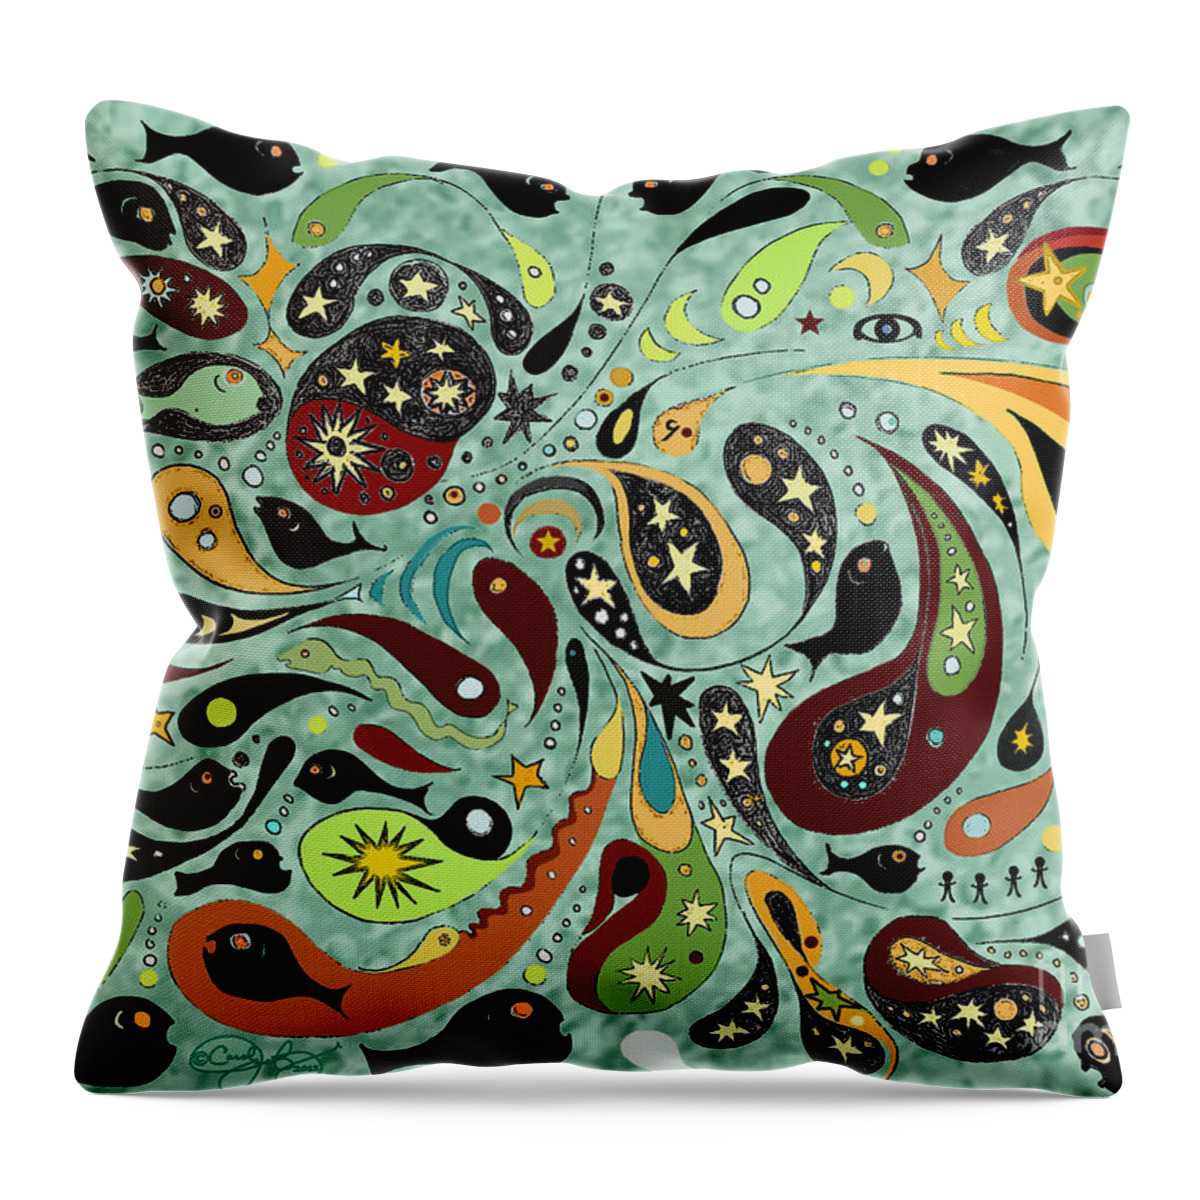 Star Throw Pillow featuring the digital art Dark Star Swims Among the Fishes by Carol Jacobs